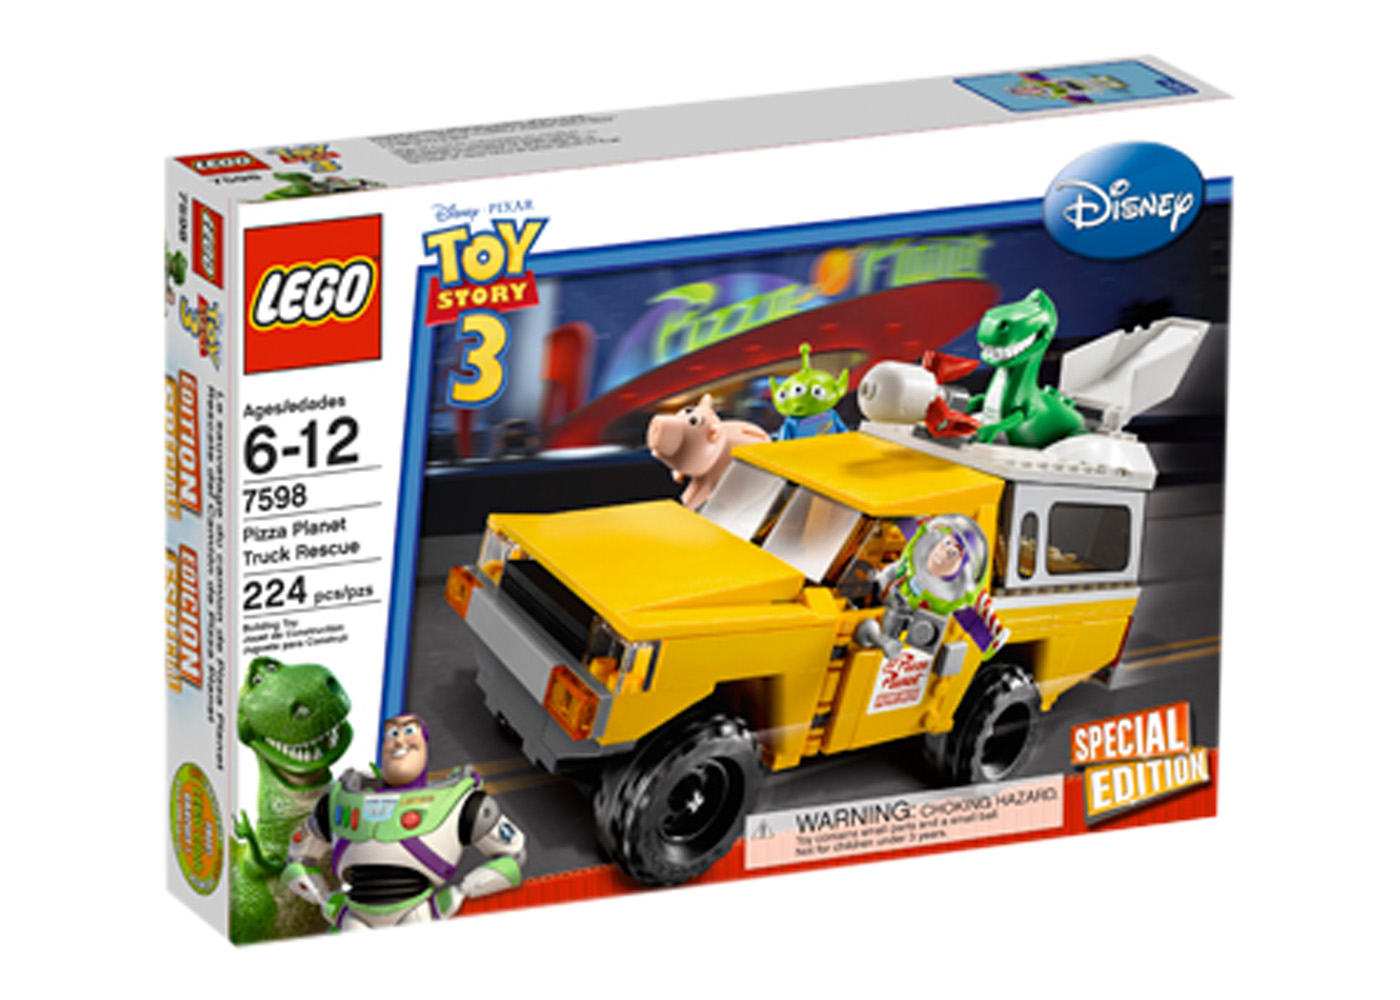 LEGO Toy Story Pizza Planet Truck Rescue Set 7598 - JP